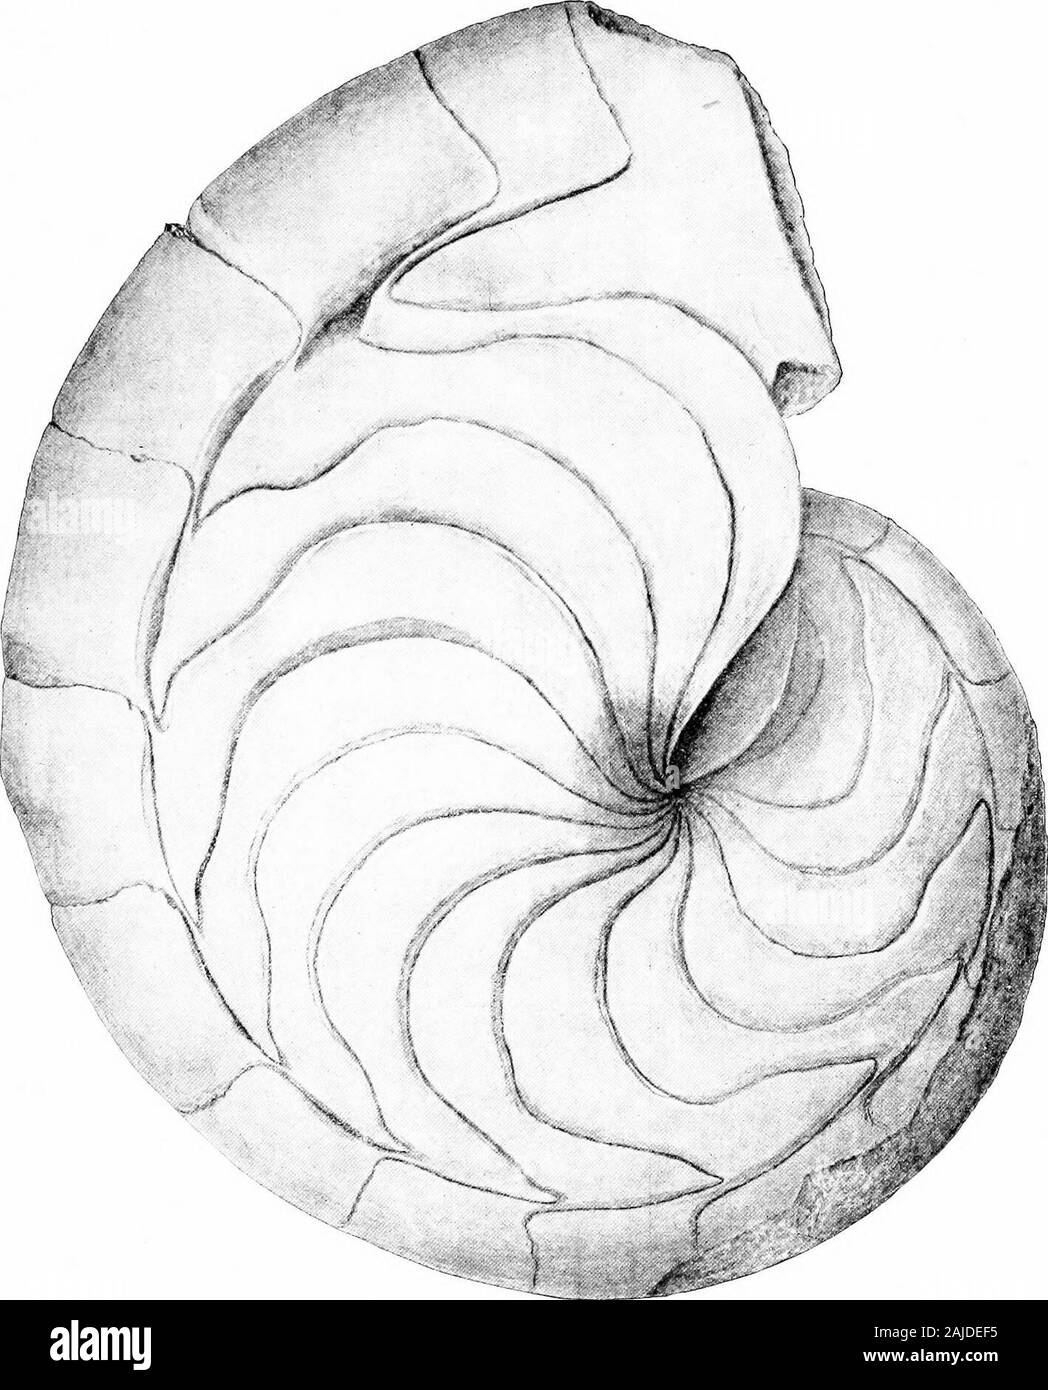 Report on paleontology . NAUTiLID^ OF THE EOCENE LAYERS OF THE UPPER BED GREENSAND MARLS. PLATE L. EXPLANATION OF PLATE L. Aturia Vanuxemi Conrad (p. 287). Fig. 1. Lateral view of a large cast from Shark River, showing the lines of septa very distinctly. The specimen is probably somewhat compressed laterally, but not otherwise distorted,The profile view on Fl. xux is of the same specimen. Kntgeia College, 398 U. S. GEOLOGICAL SURVEY MONOGRAPH XVIII PLATE L. NAUTILID/E OF THE EOCENE LAYERS OF THE UPPER BED GREENSAND MARLS. i:NrDE:x. Page. Action attenuata 157 biplicata 156 oretacea Gabb 158,336 Stock Photo